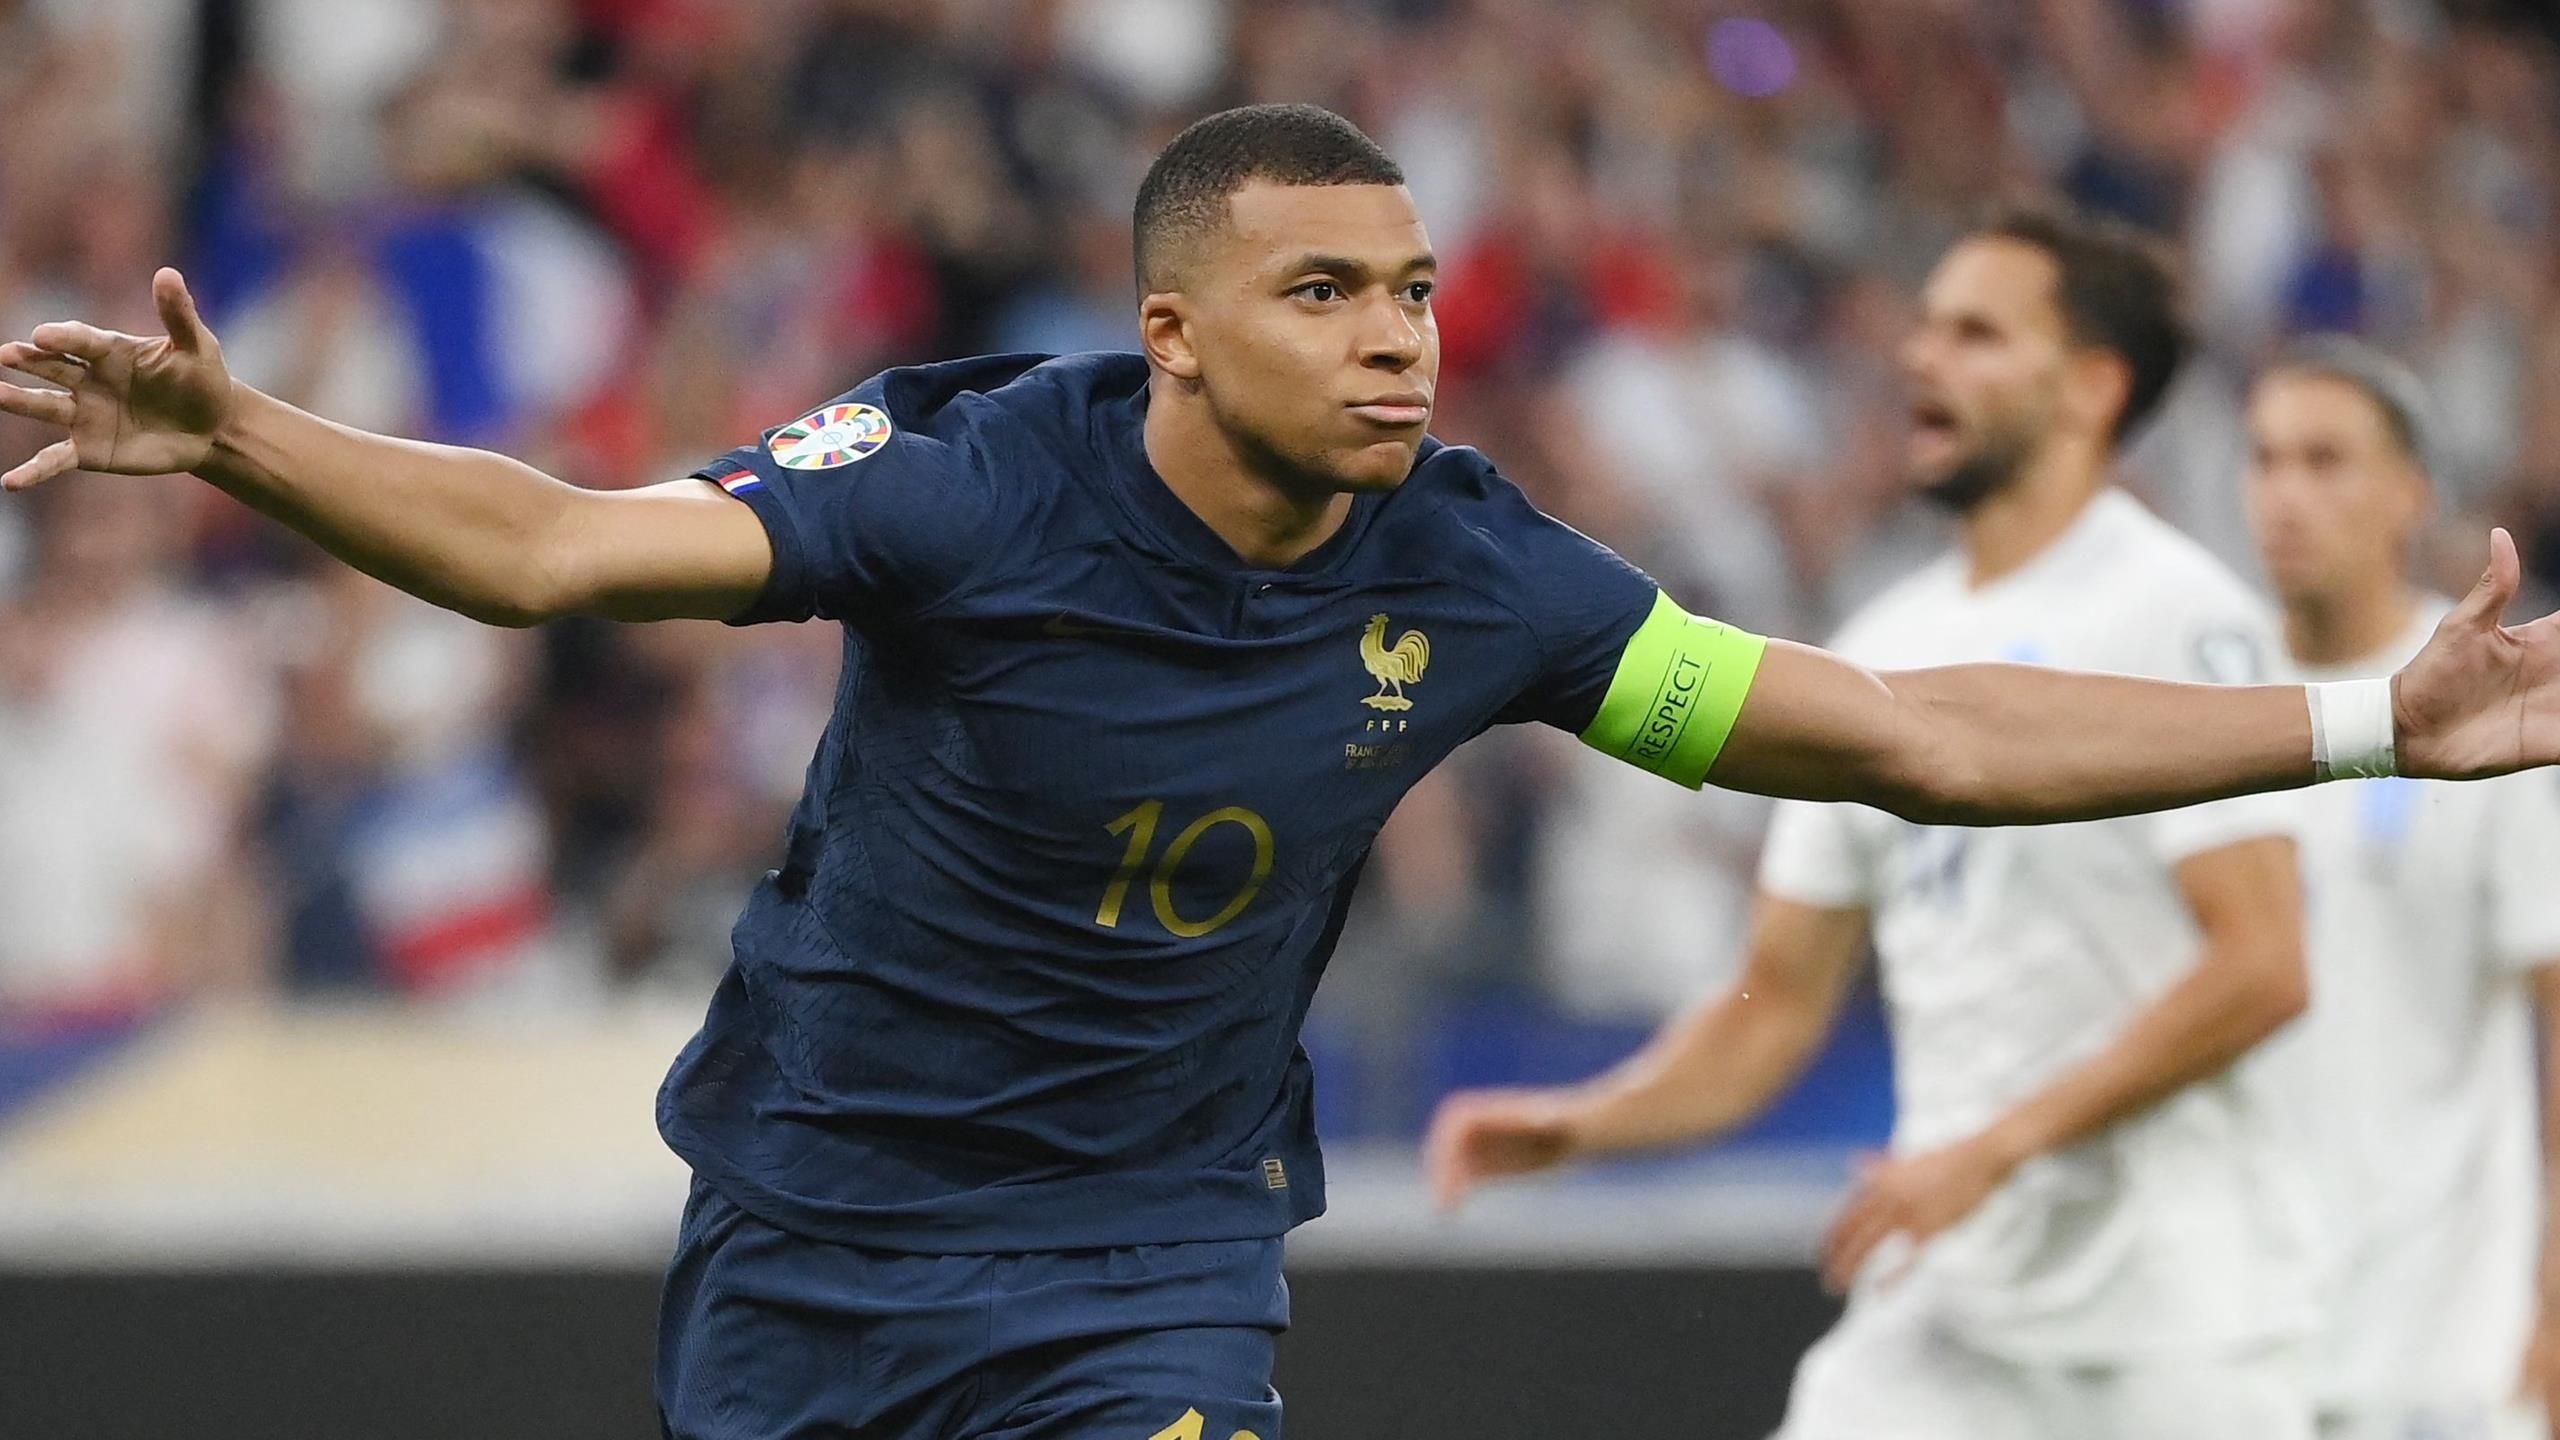 France 10 Greece Kylian Mbappe's record 54th goal of season decides